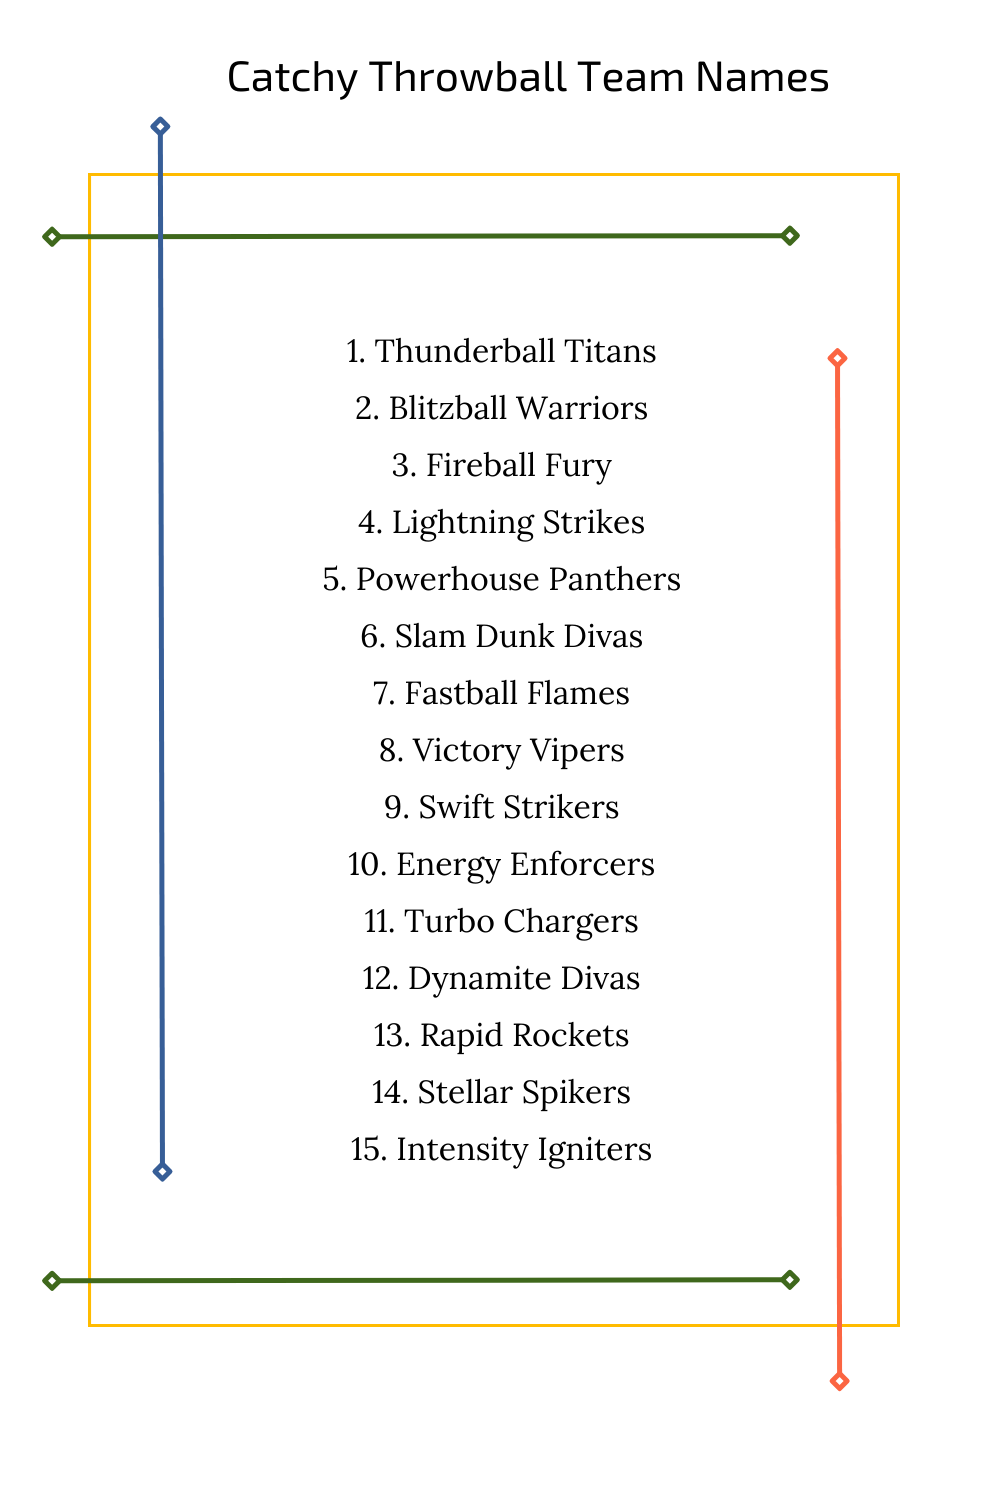 Catchy Throwball Team Names